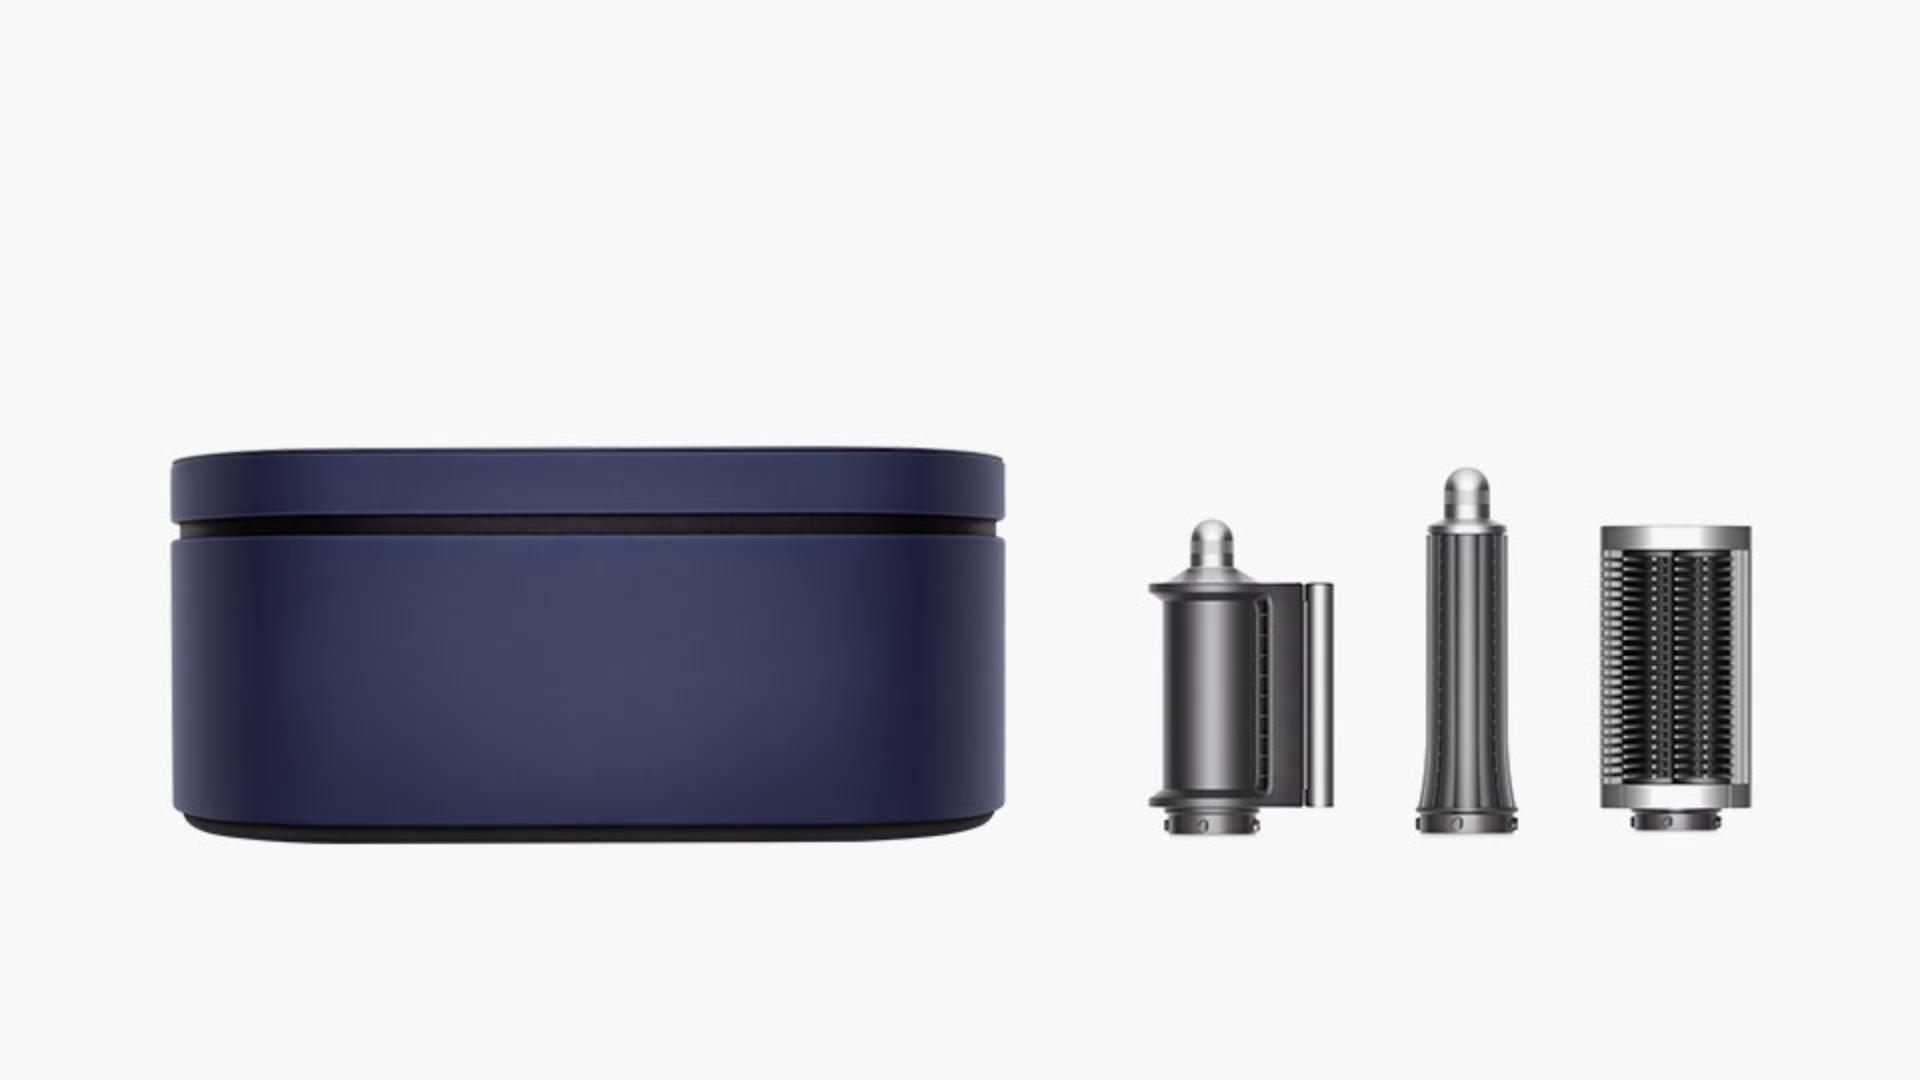 Dyson Airwrap™ multi-styler and dryer attachments